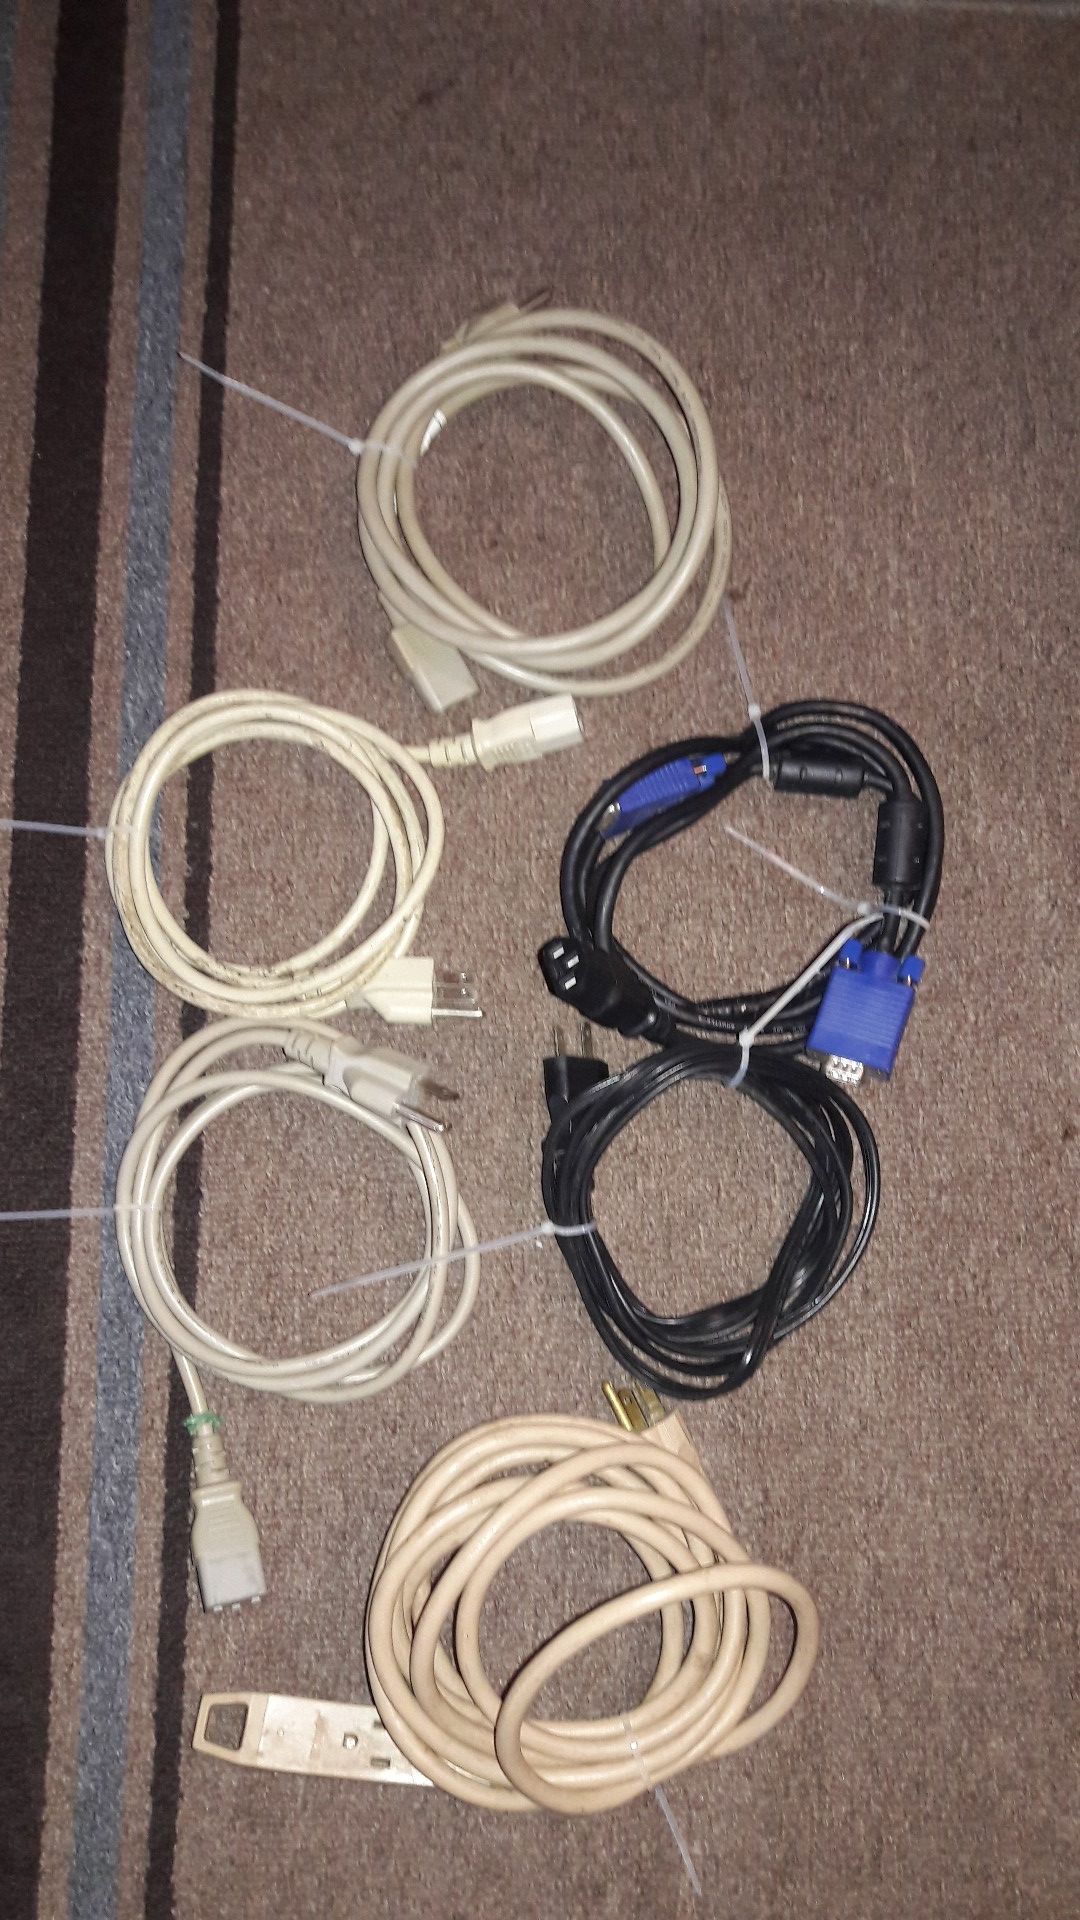 Assorted computer power cords and monitor cords